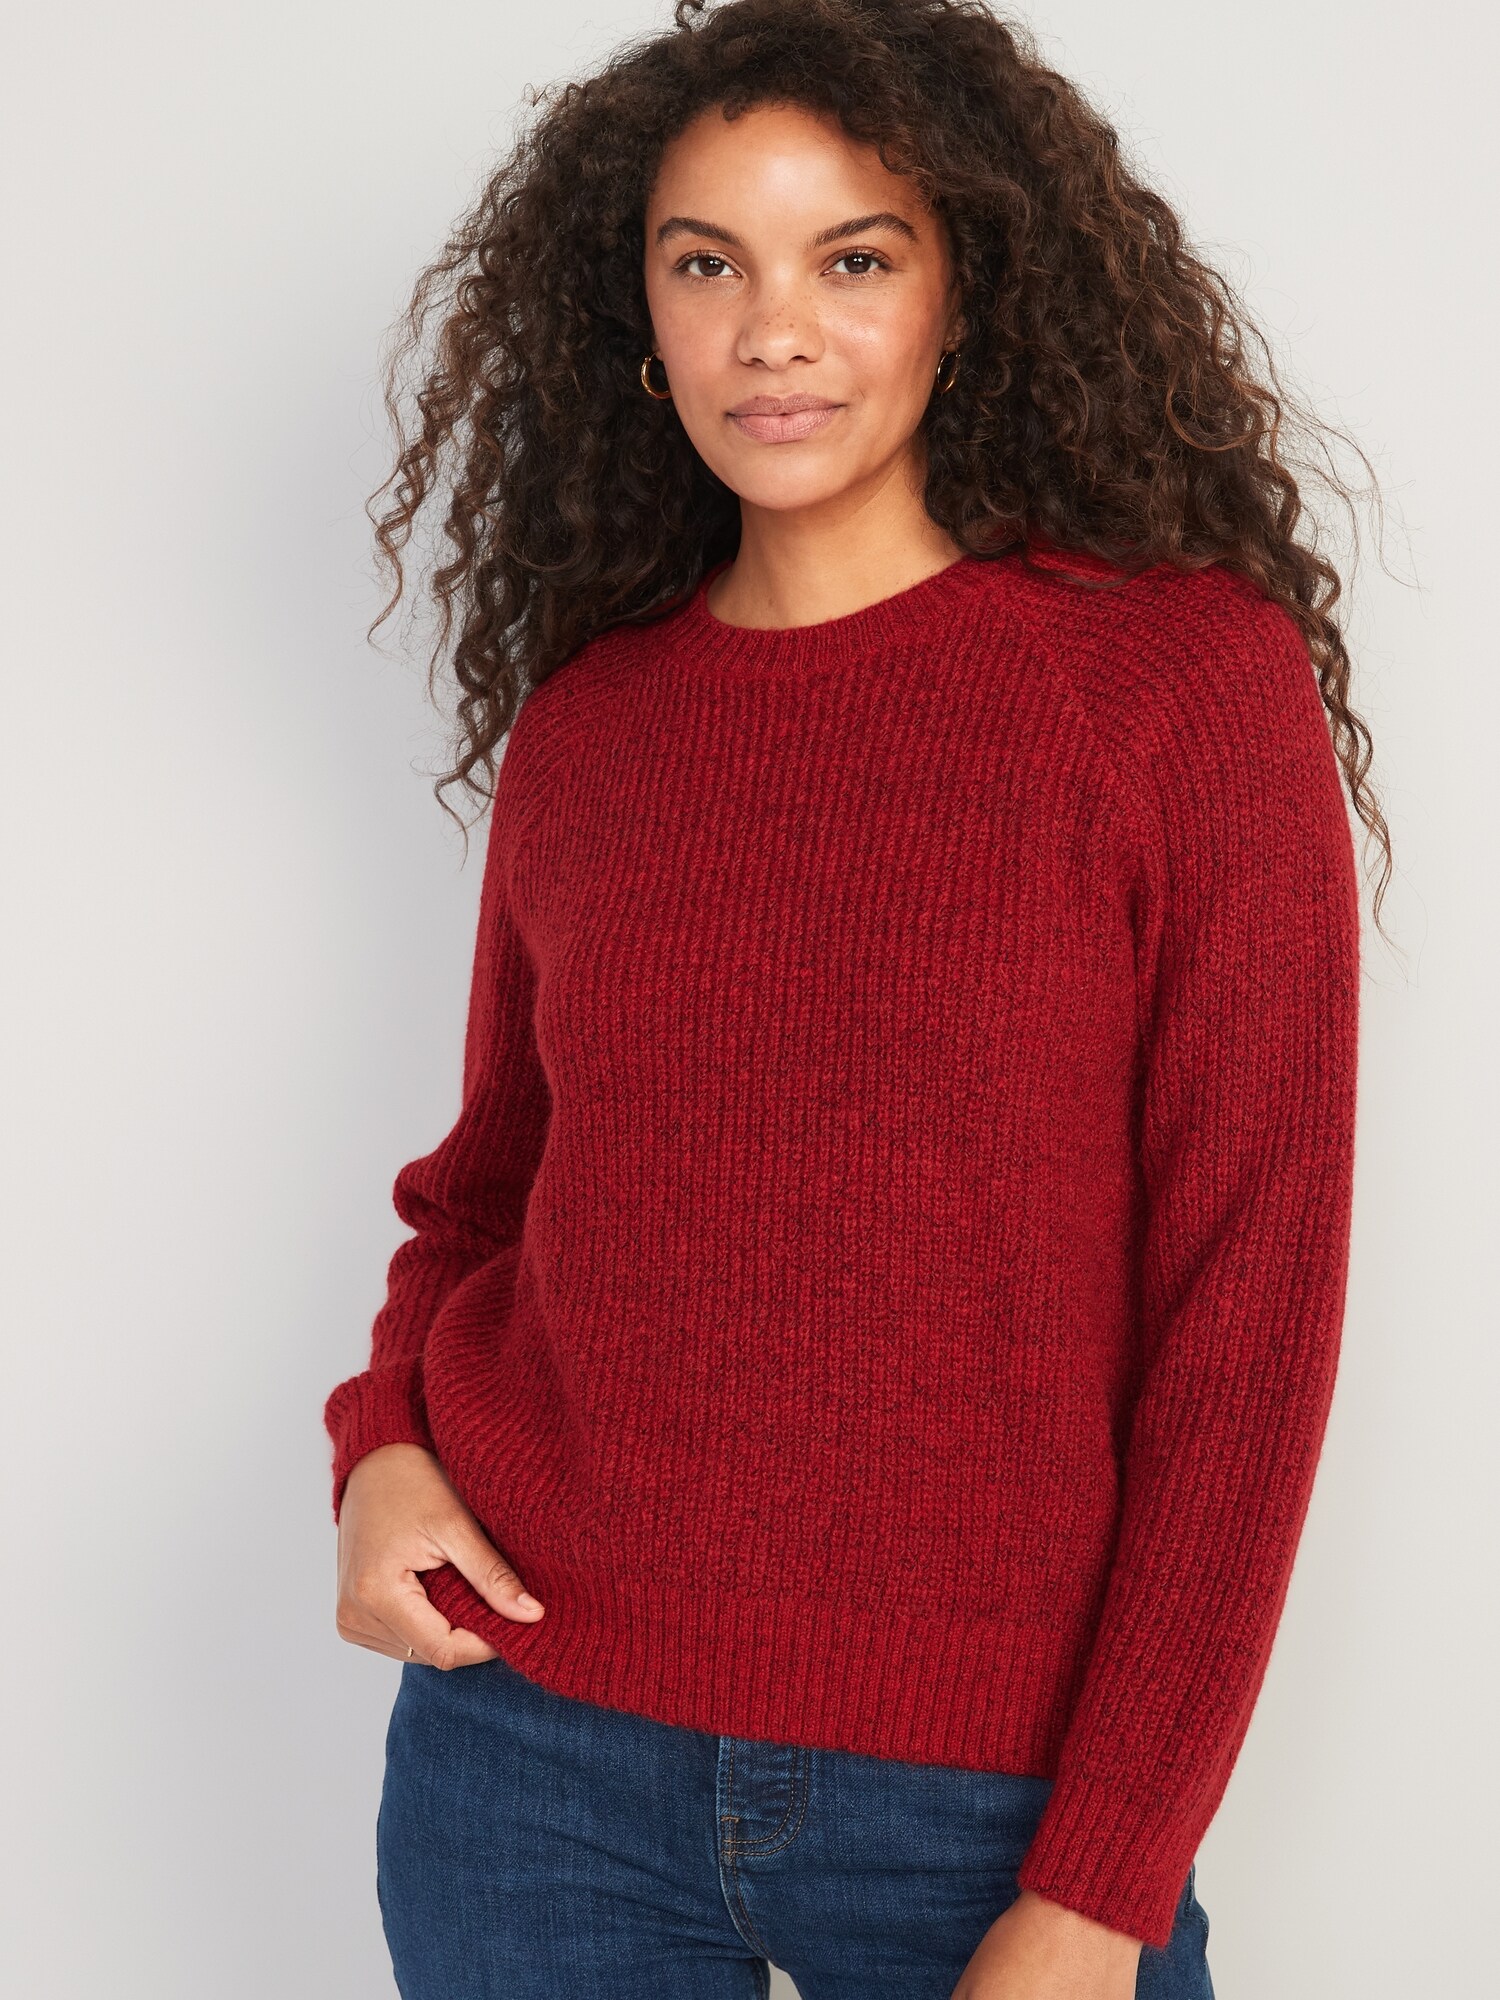 Old Navy Cozy Shaker-Stitch Pullover Sweater for Women red. 1